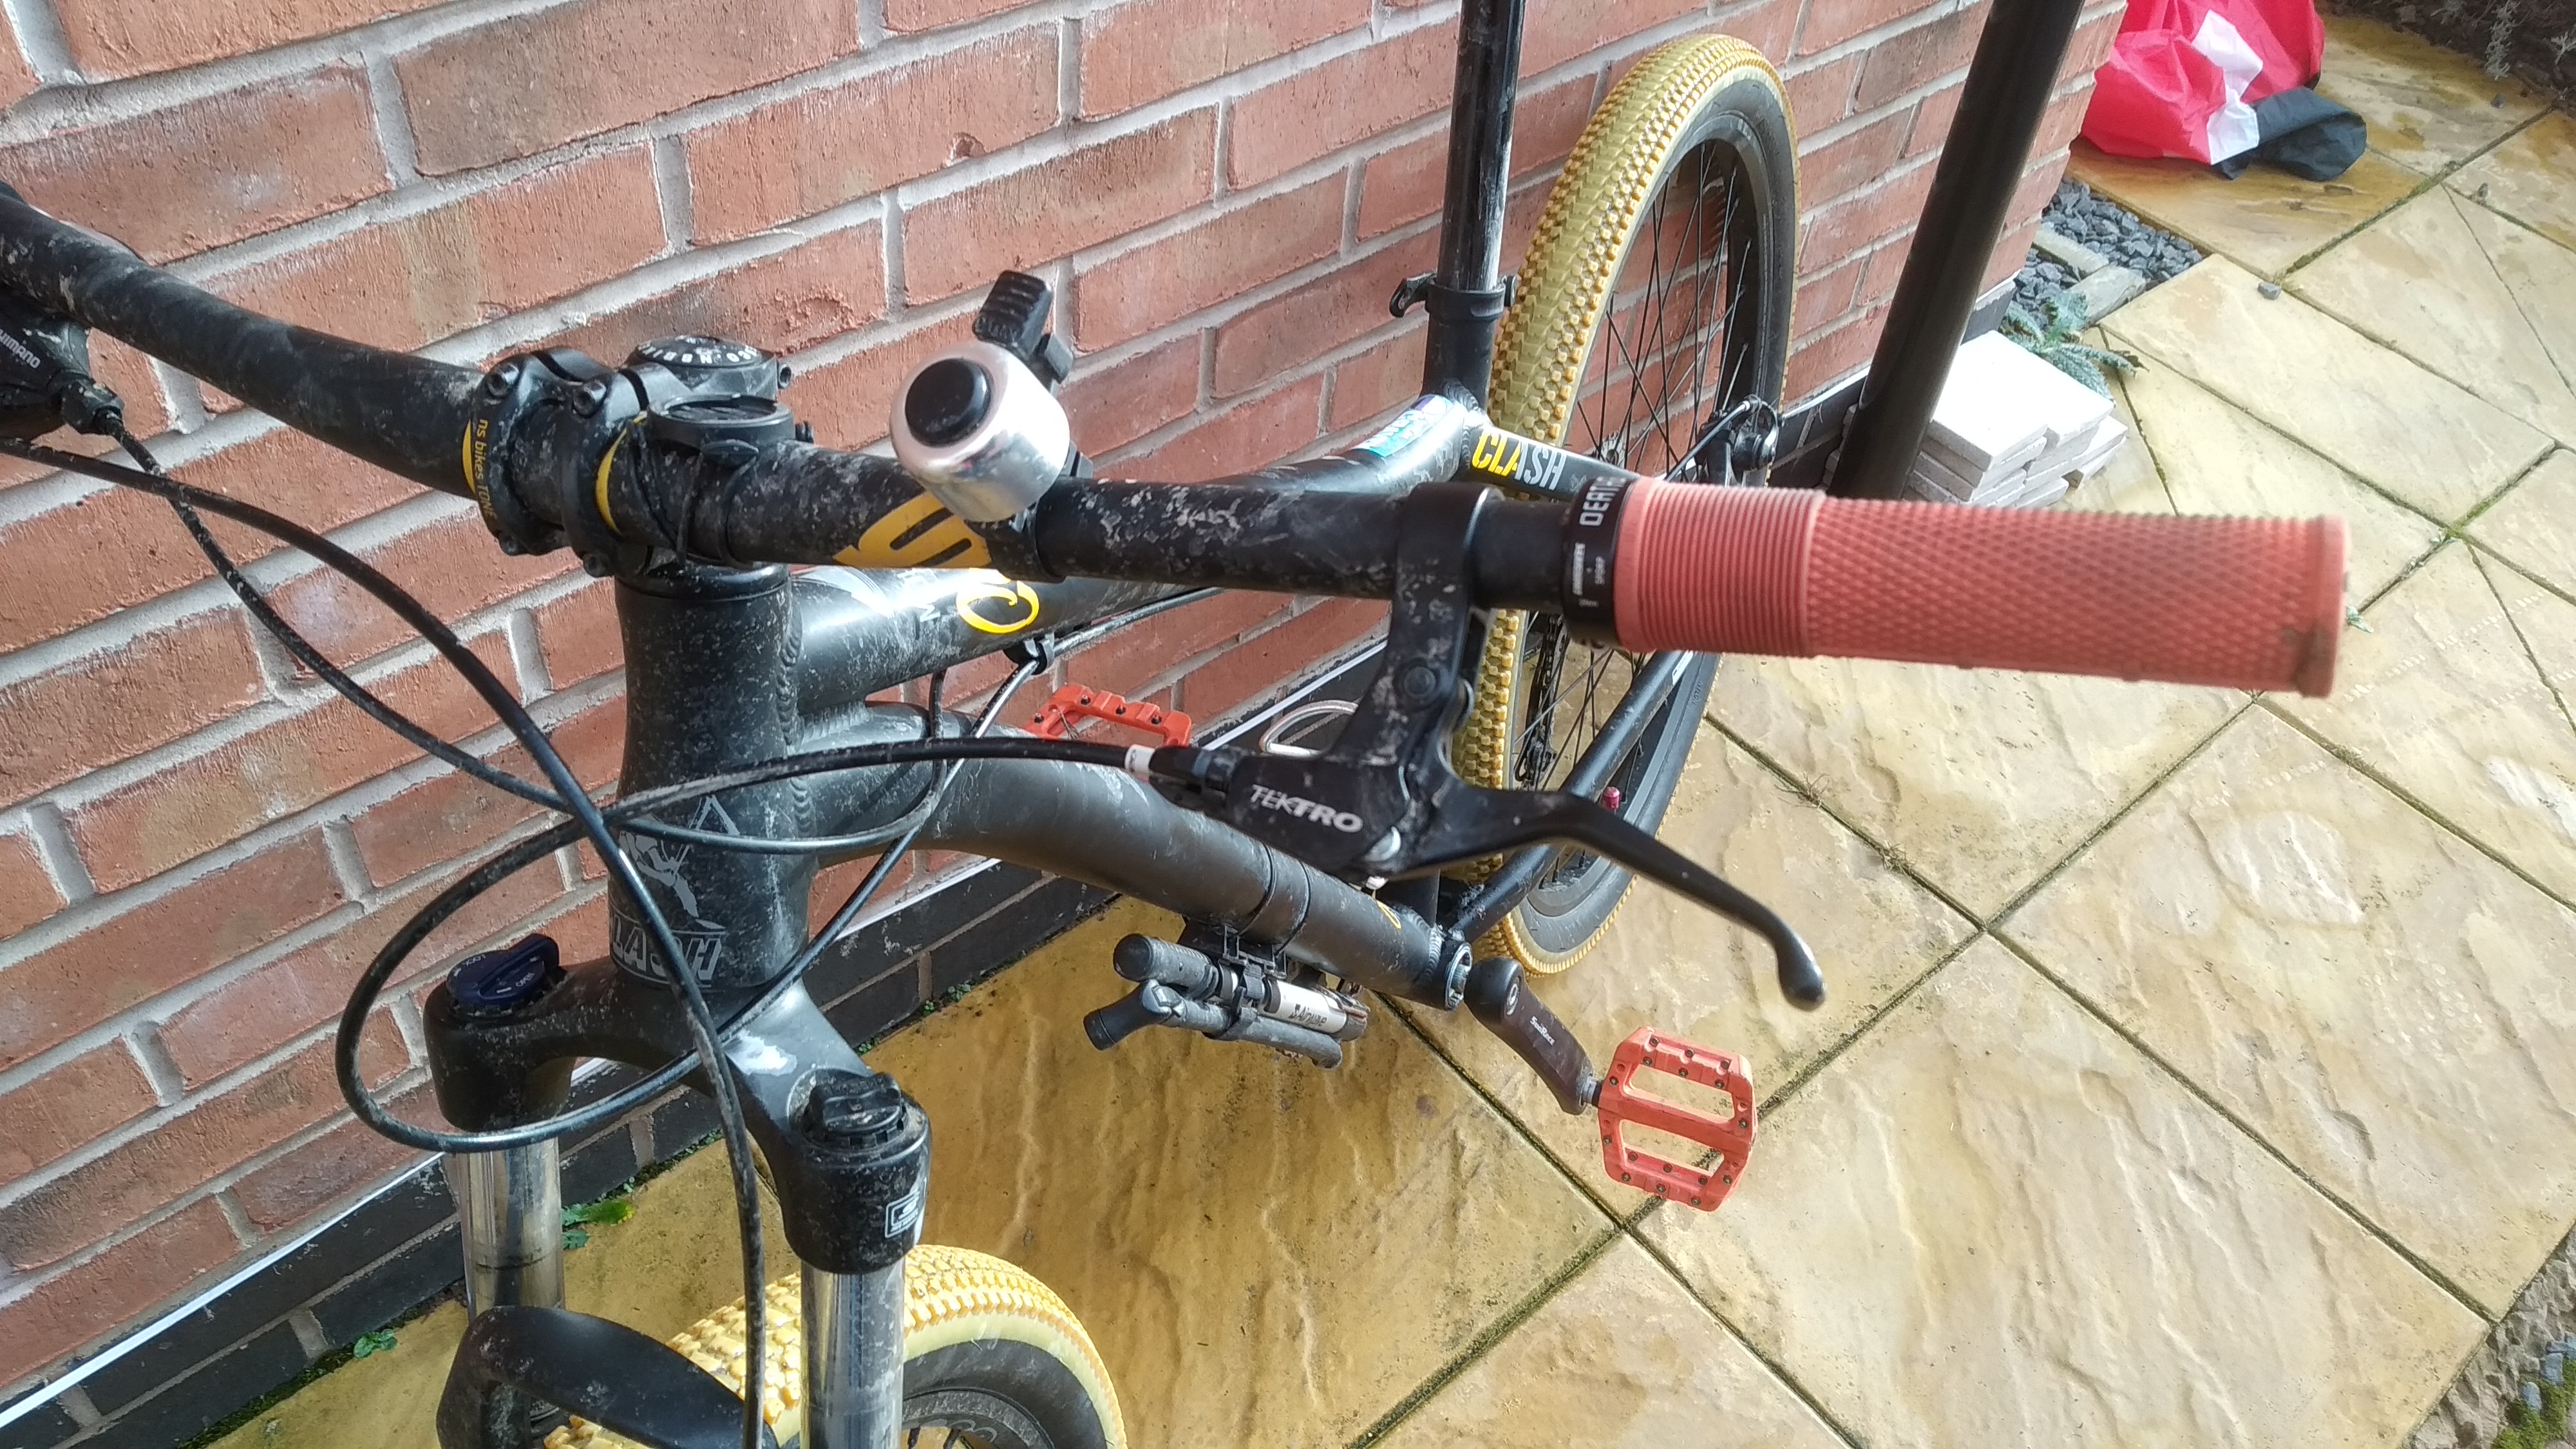 The front end of a slightly muddy bike. The cables run a mess through the front and down the bike.